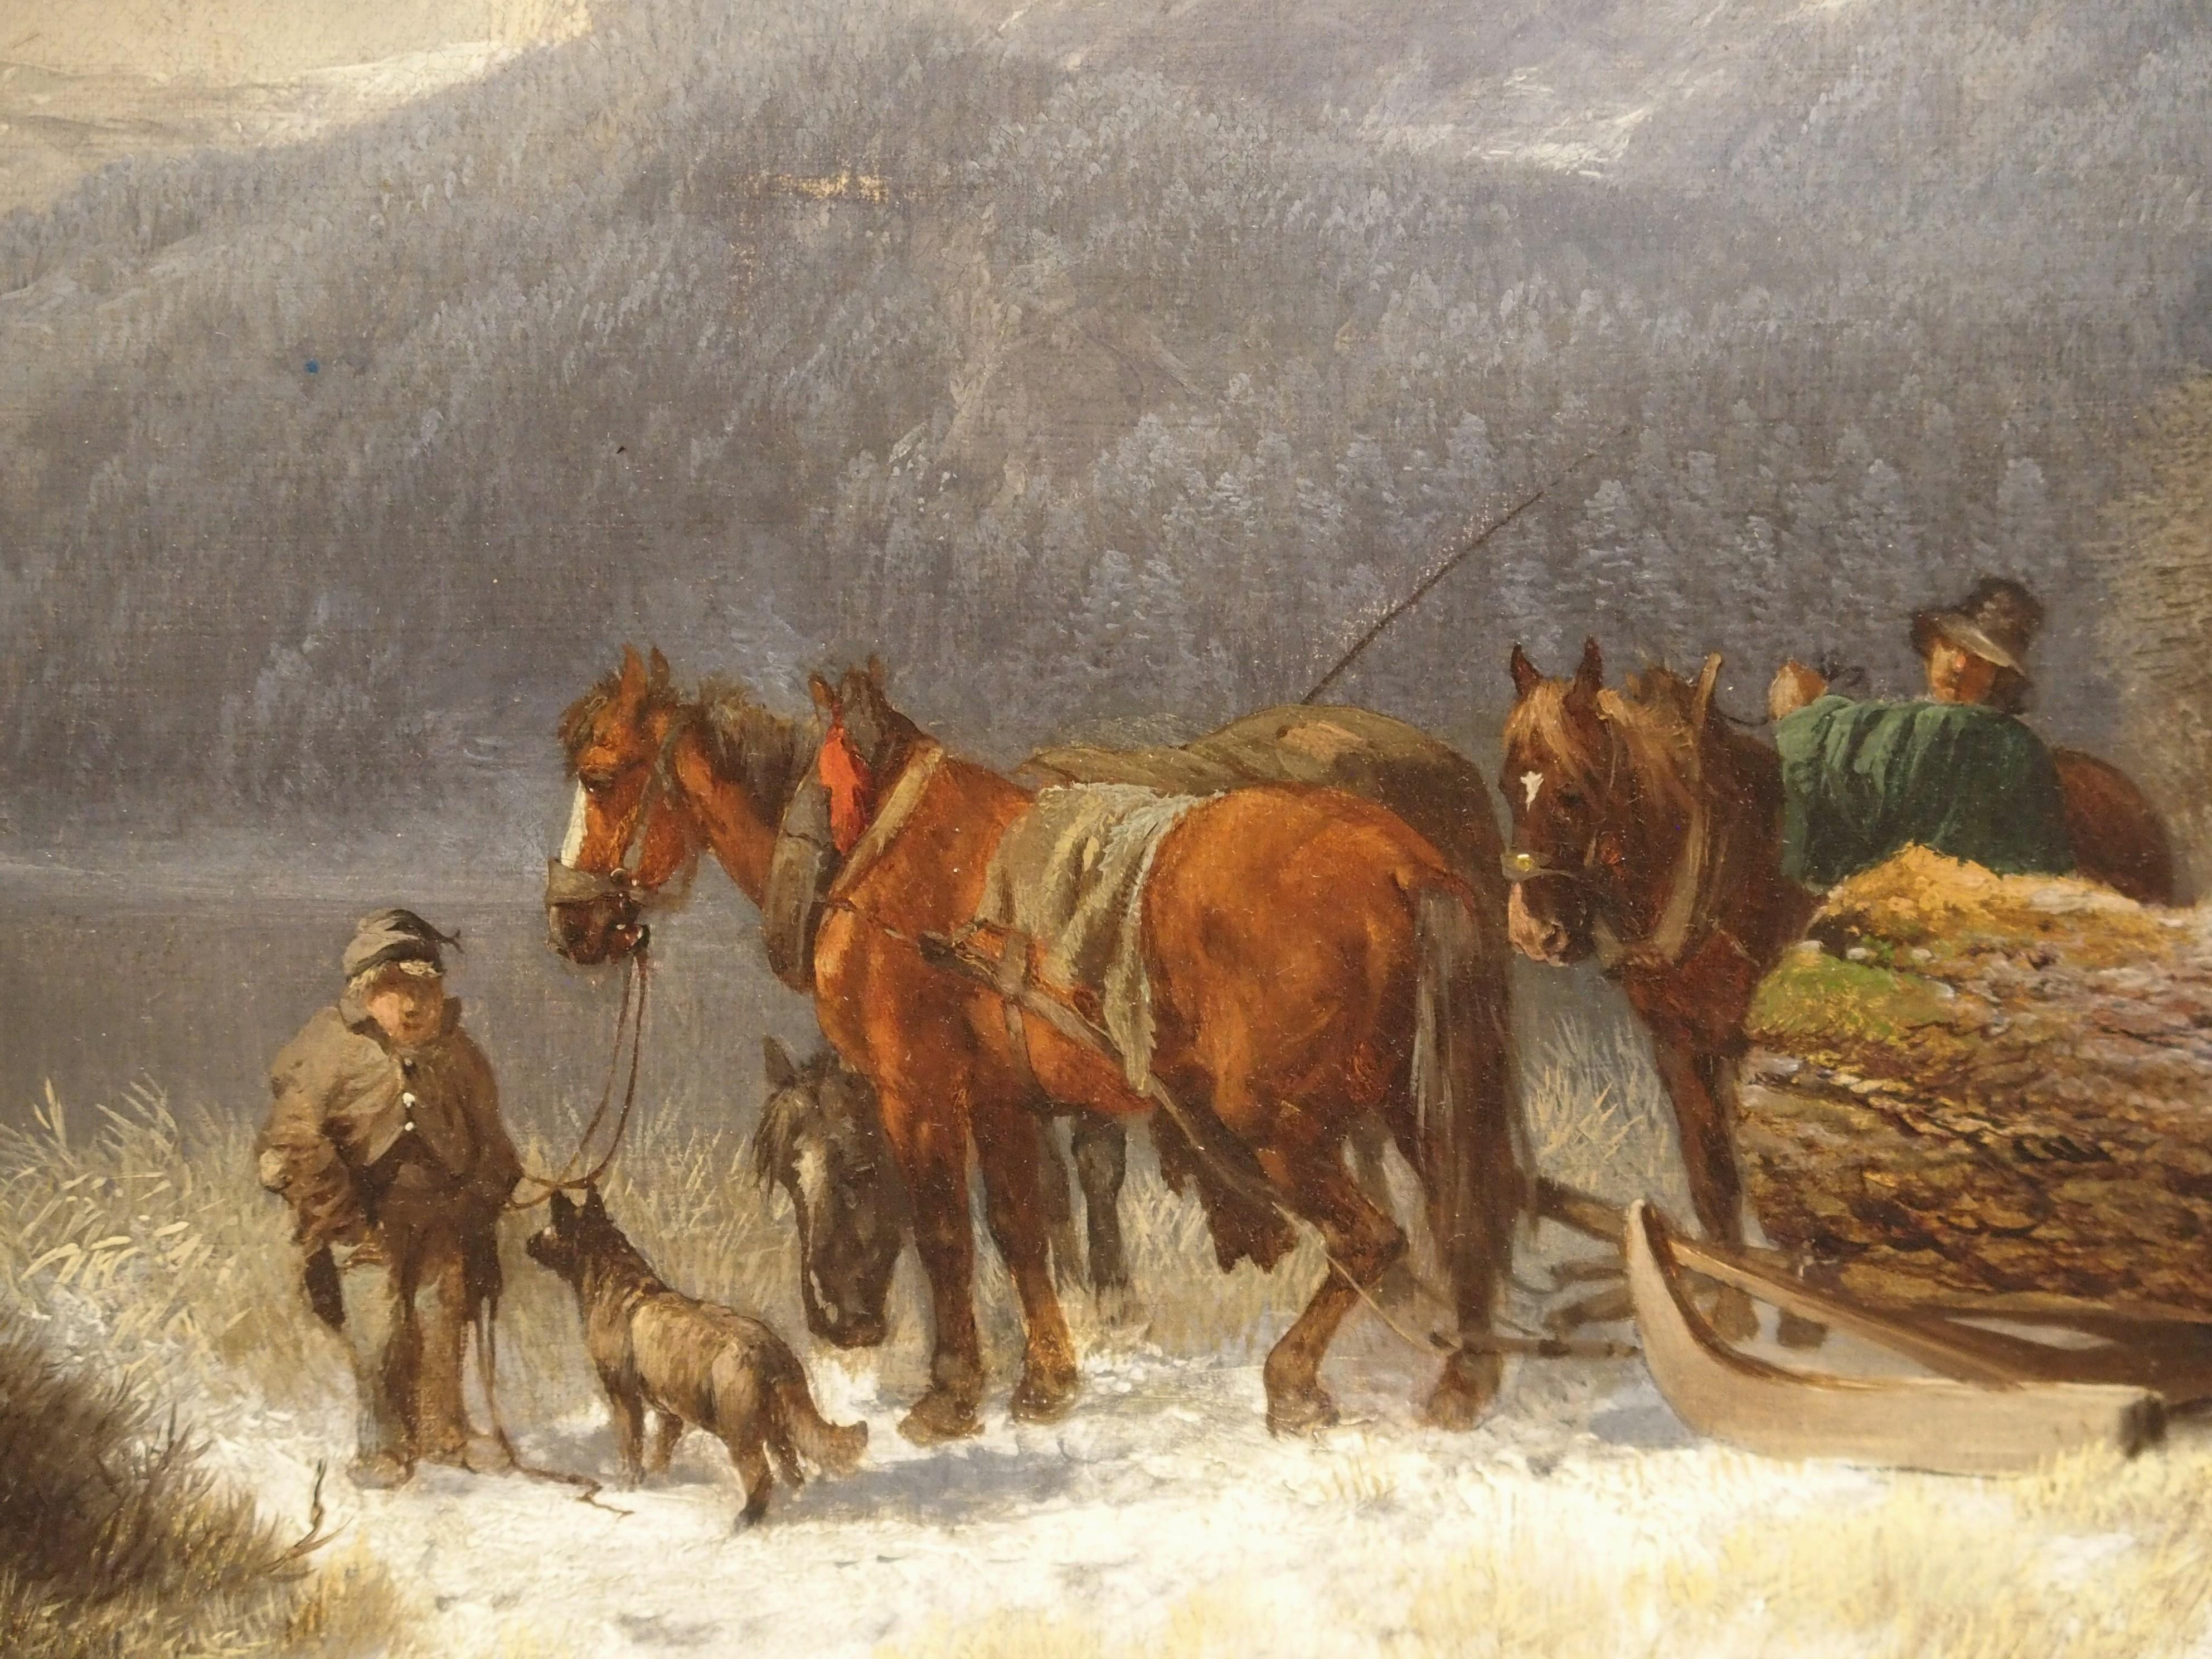 Giltwood Antique Oil on Canvas, Mountain Horse Logging Scene, Germany, 1867